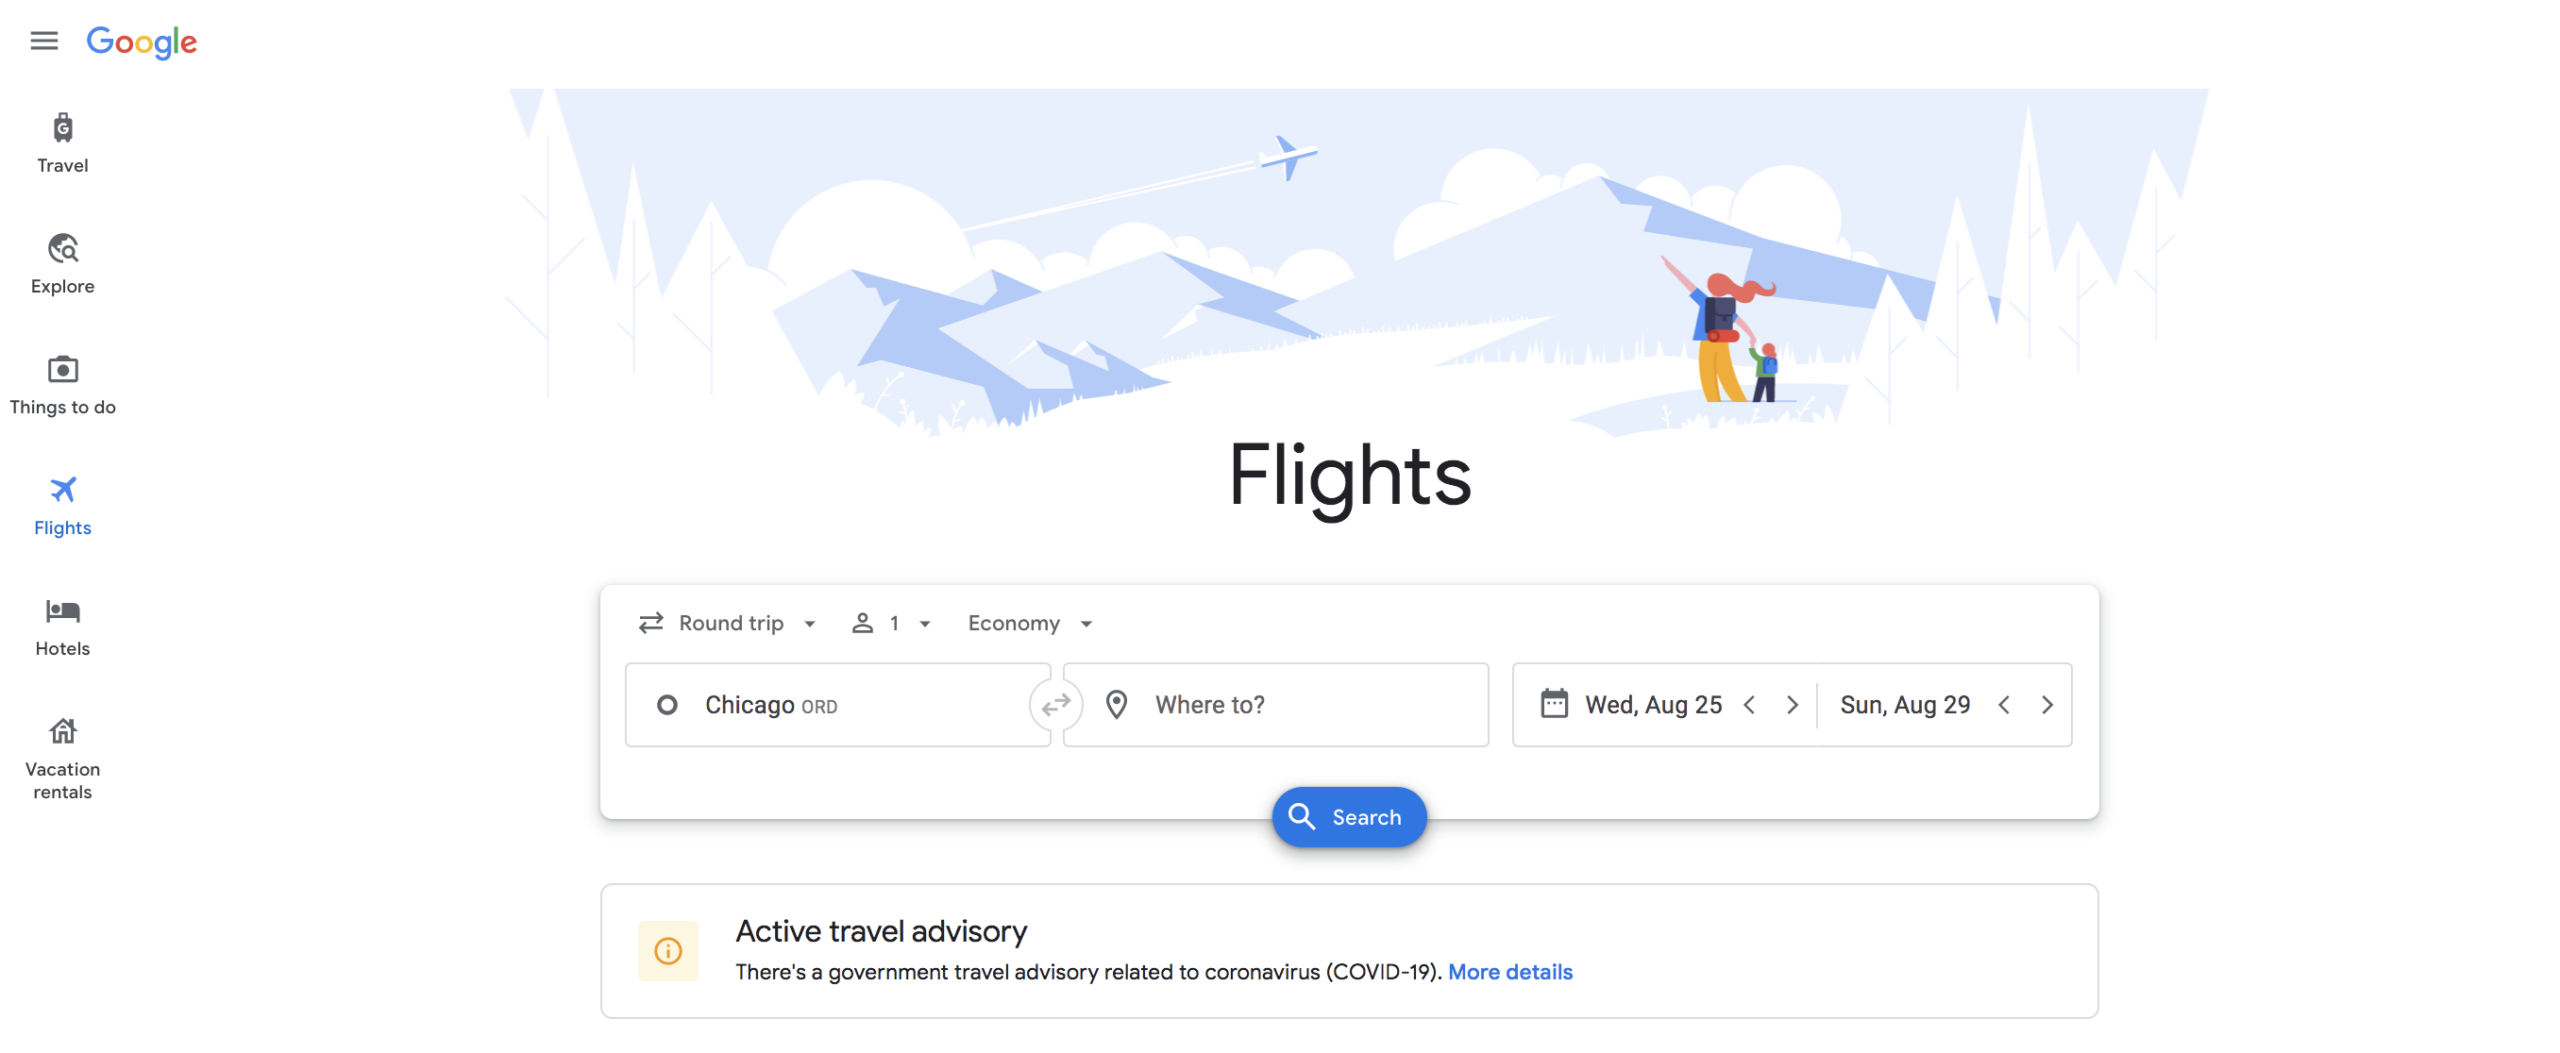 google flights homepage  How to Use Google Flights to Find Cheap Flights in 2022 &#8211; Thrifty Traveler google flights homepage